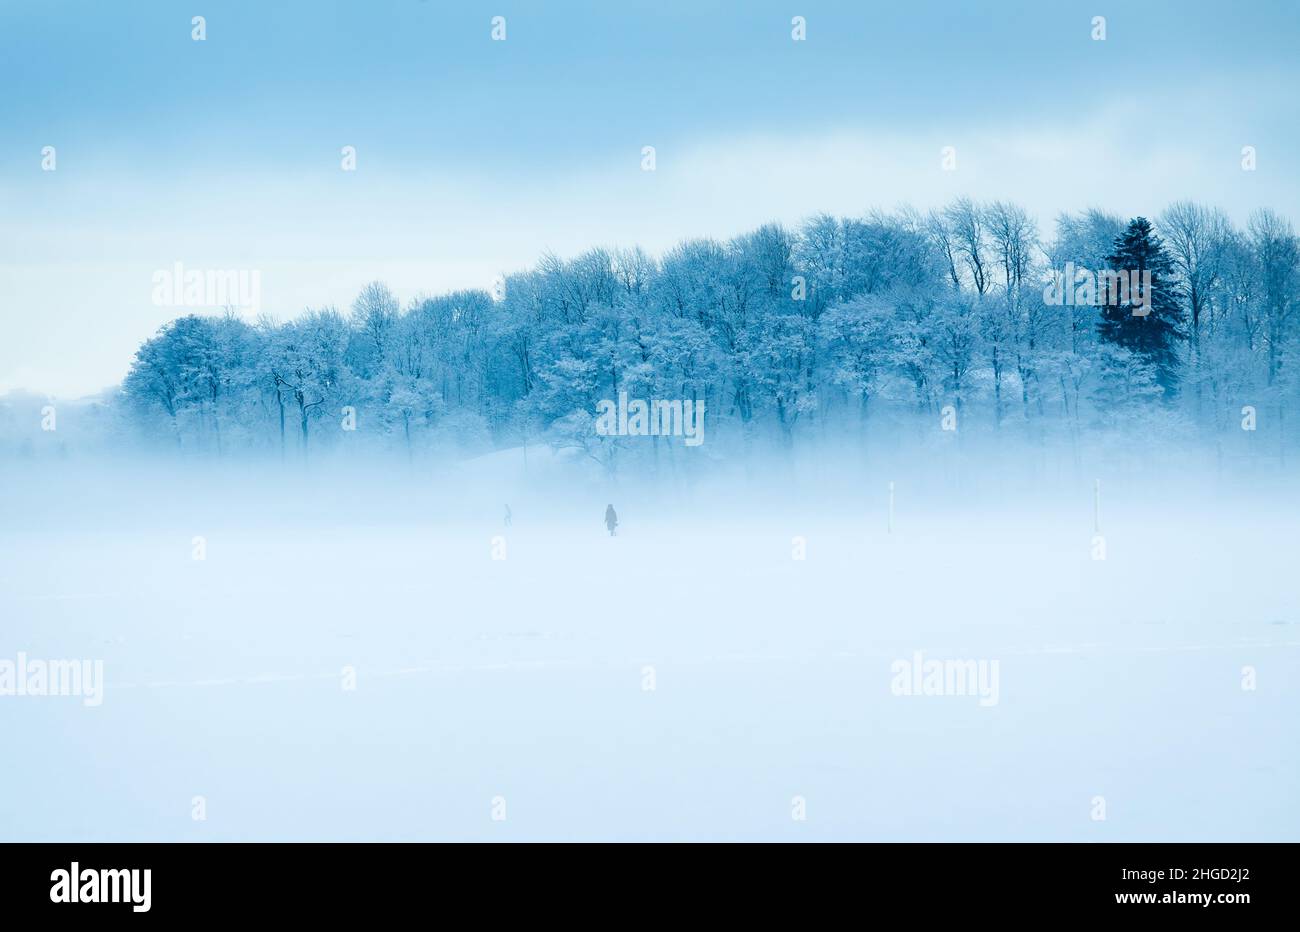 Foggy winter landscape. People walking on the frozen sea. Snow covered trees. Stock Photo